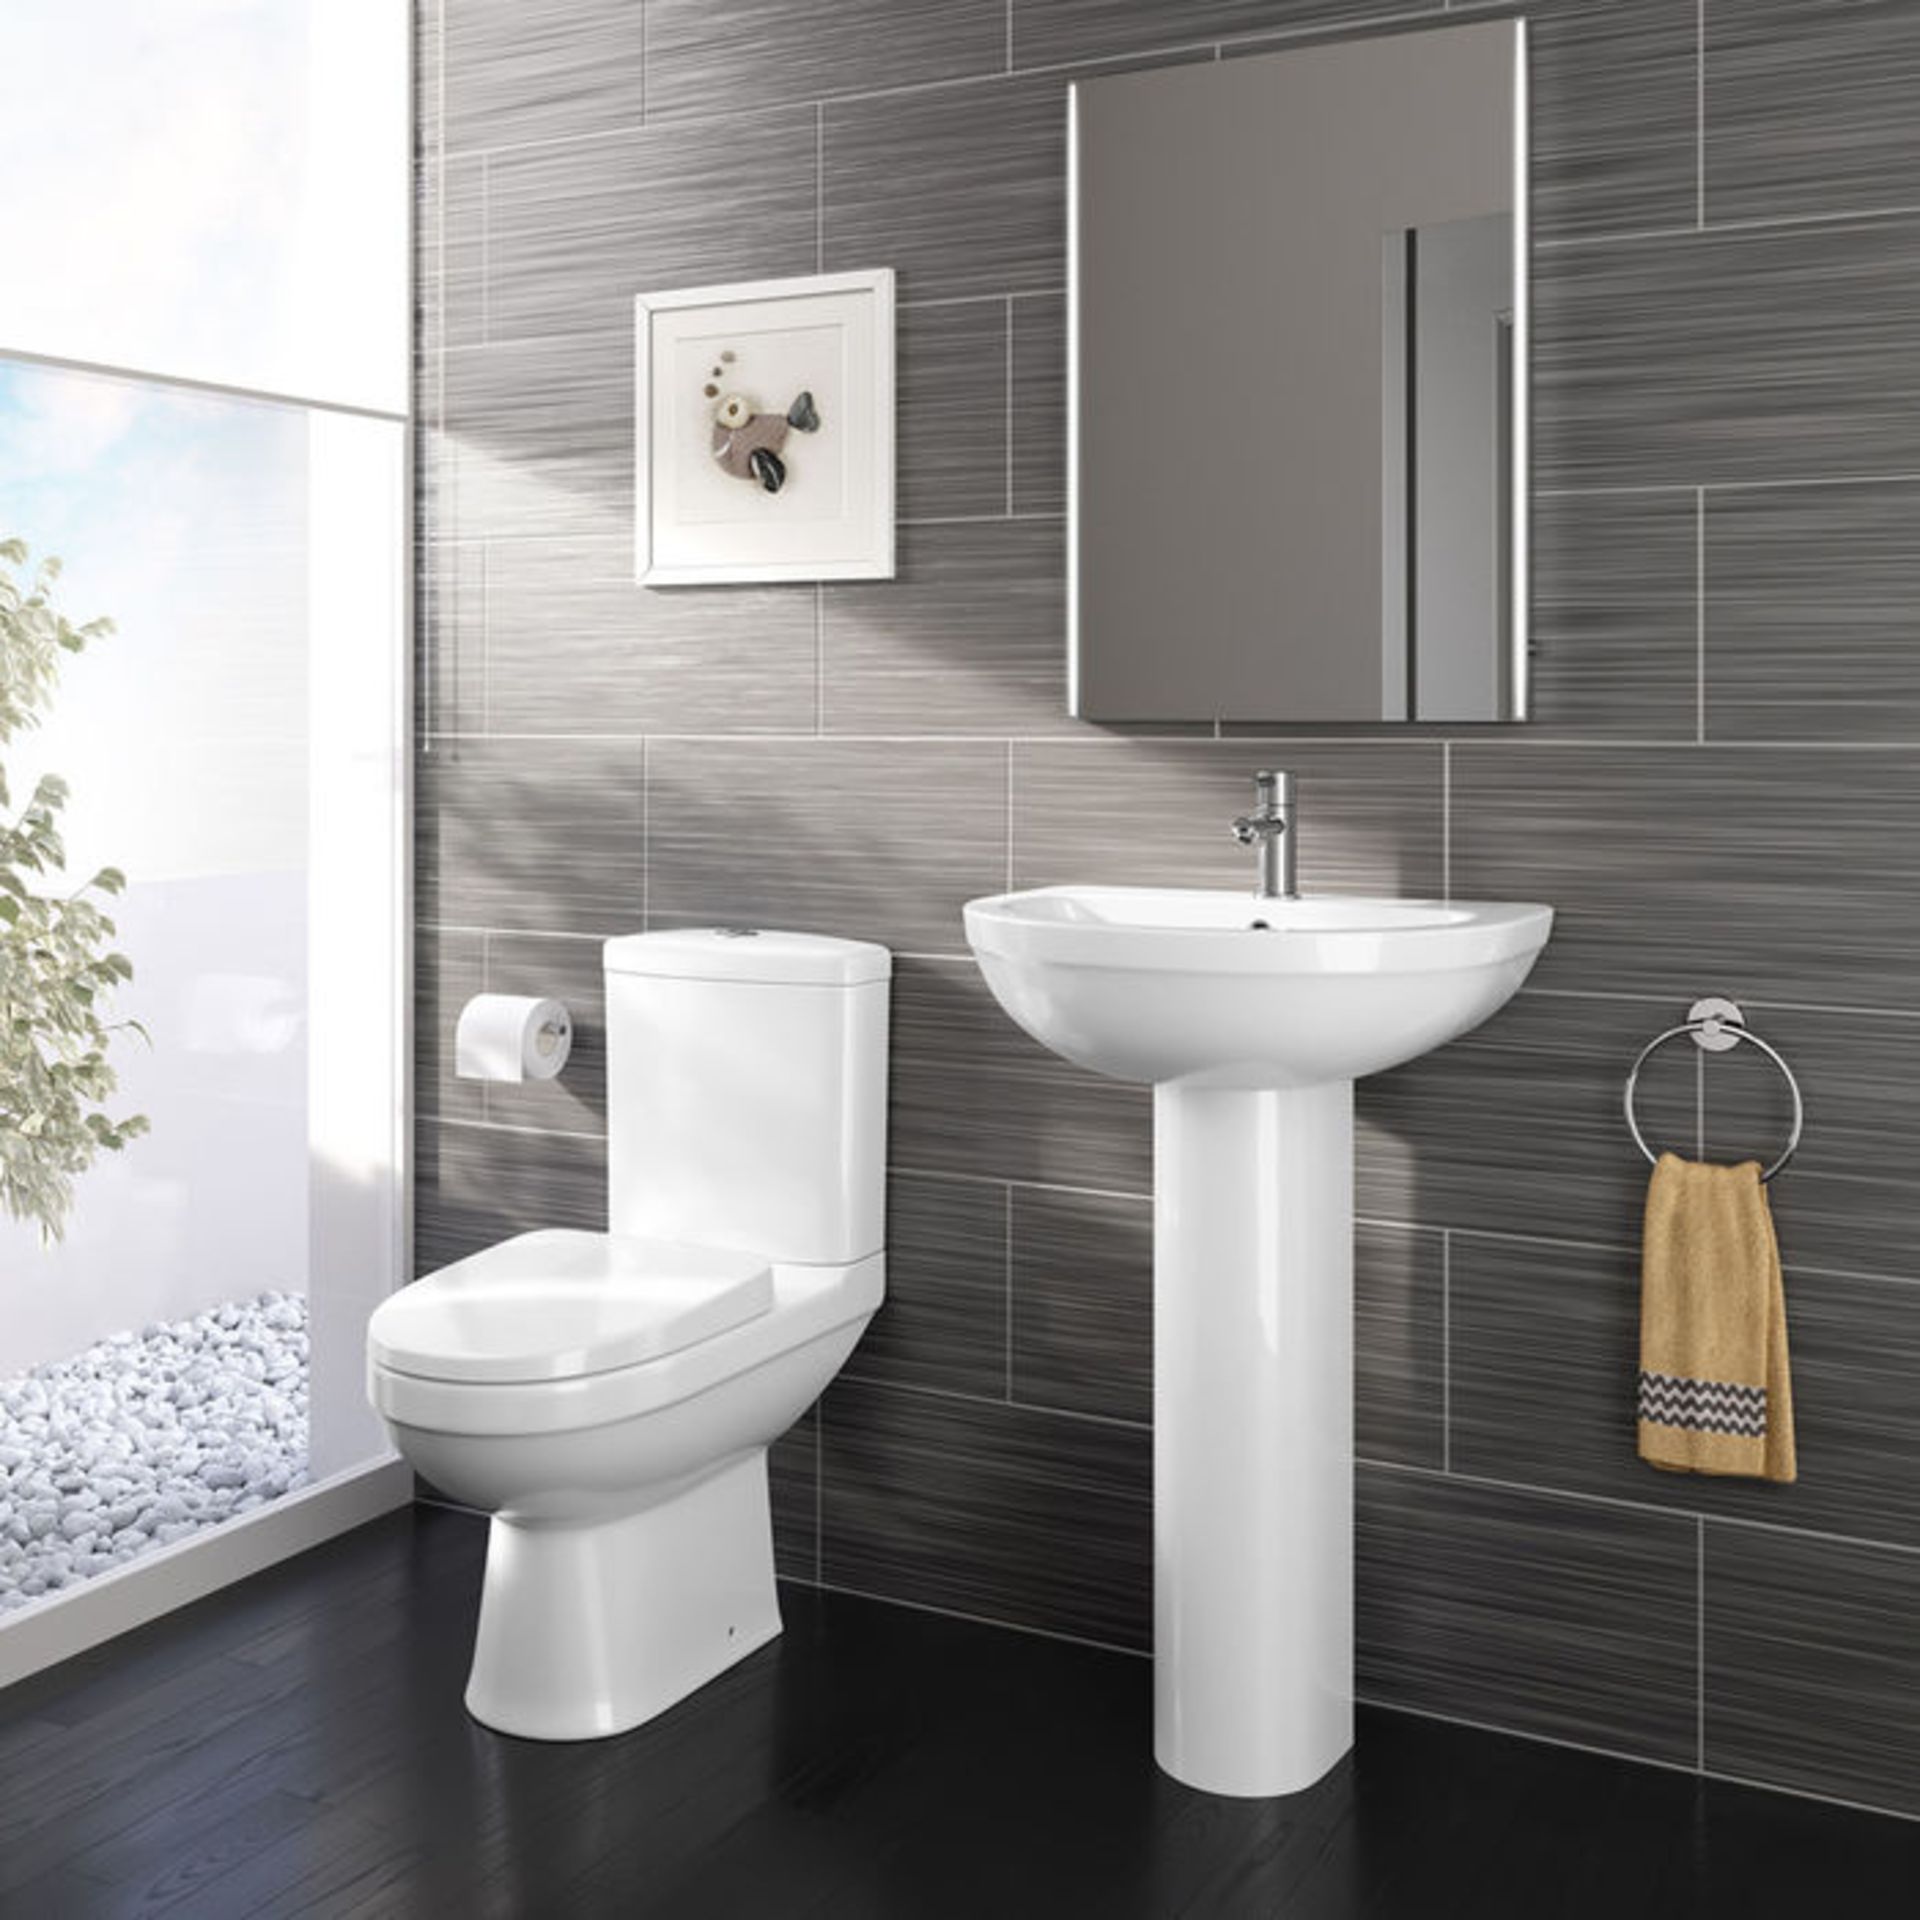 (ZZ68) Sabrosa II Close Coupled Toilet & Cistern inc Soft Close Seat. Made from White Vitreous China - Image 2 of 4